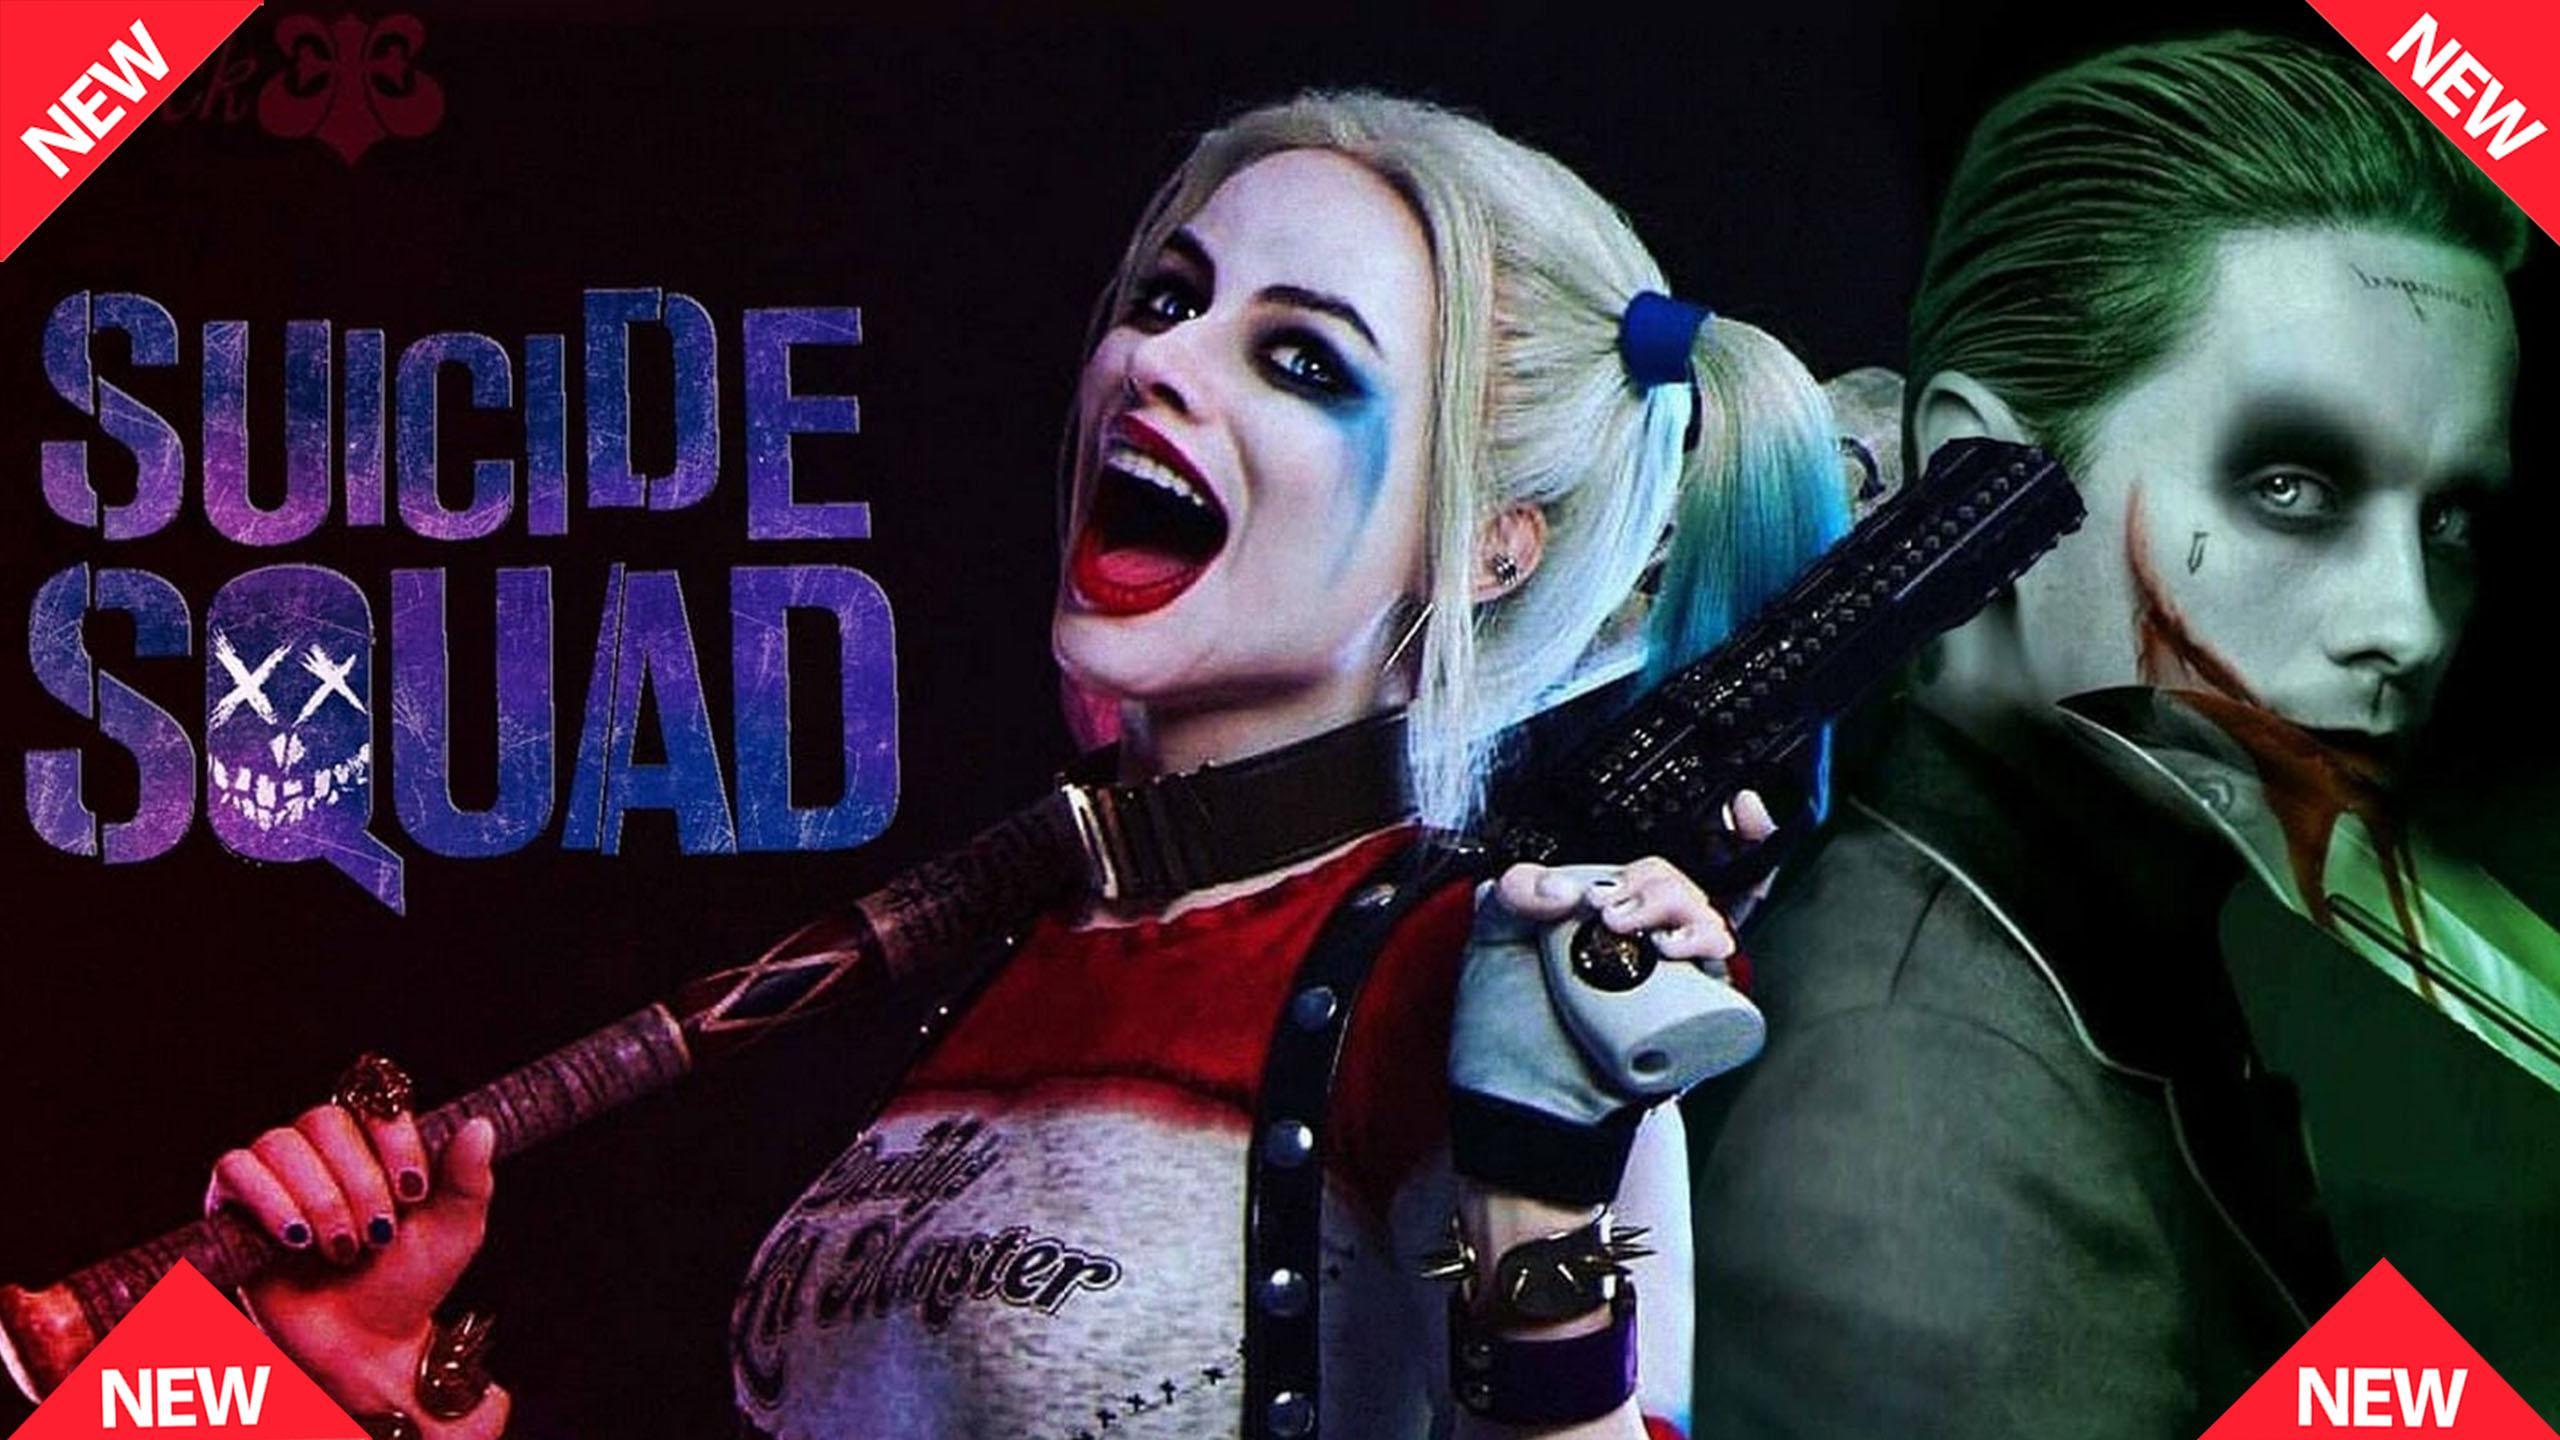 Harley Quinn And Joker Wallpaper Hd For Android Apk , HD Wallpaper & Backgrounds